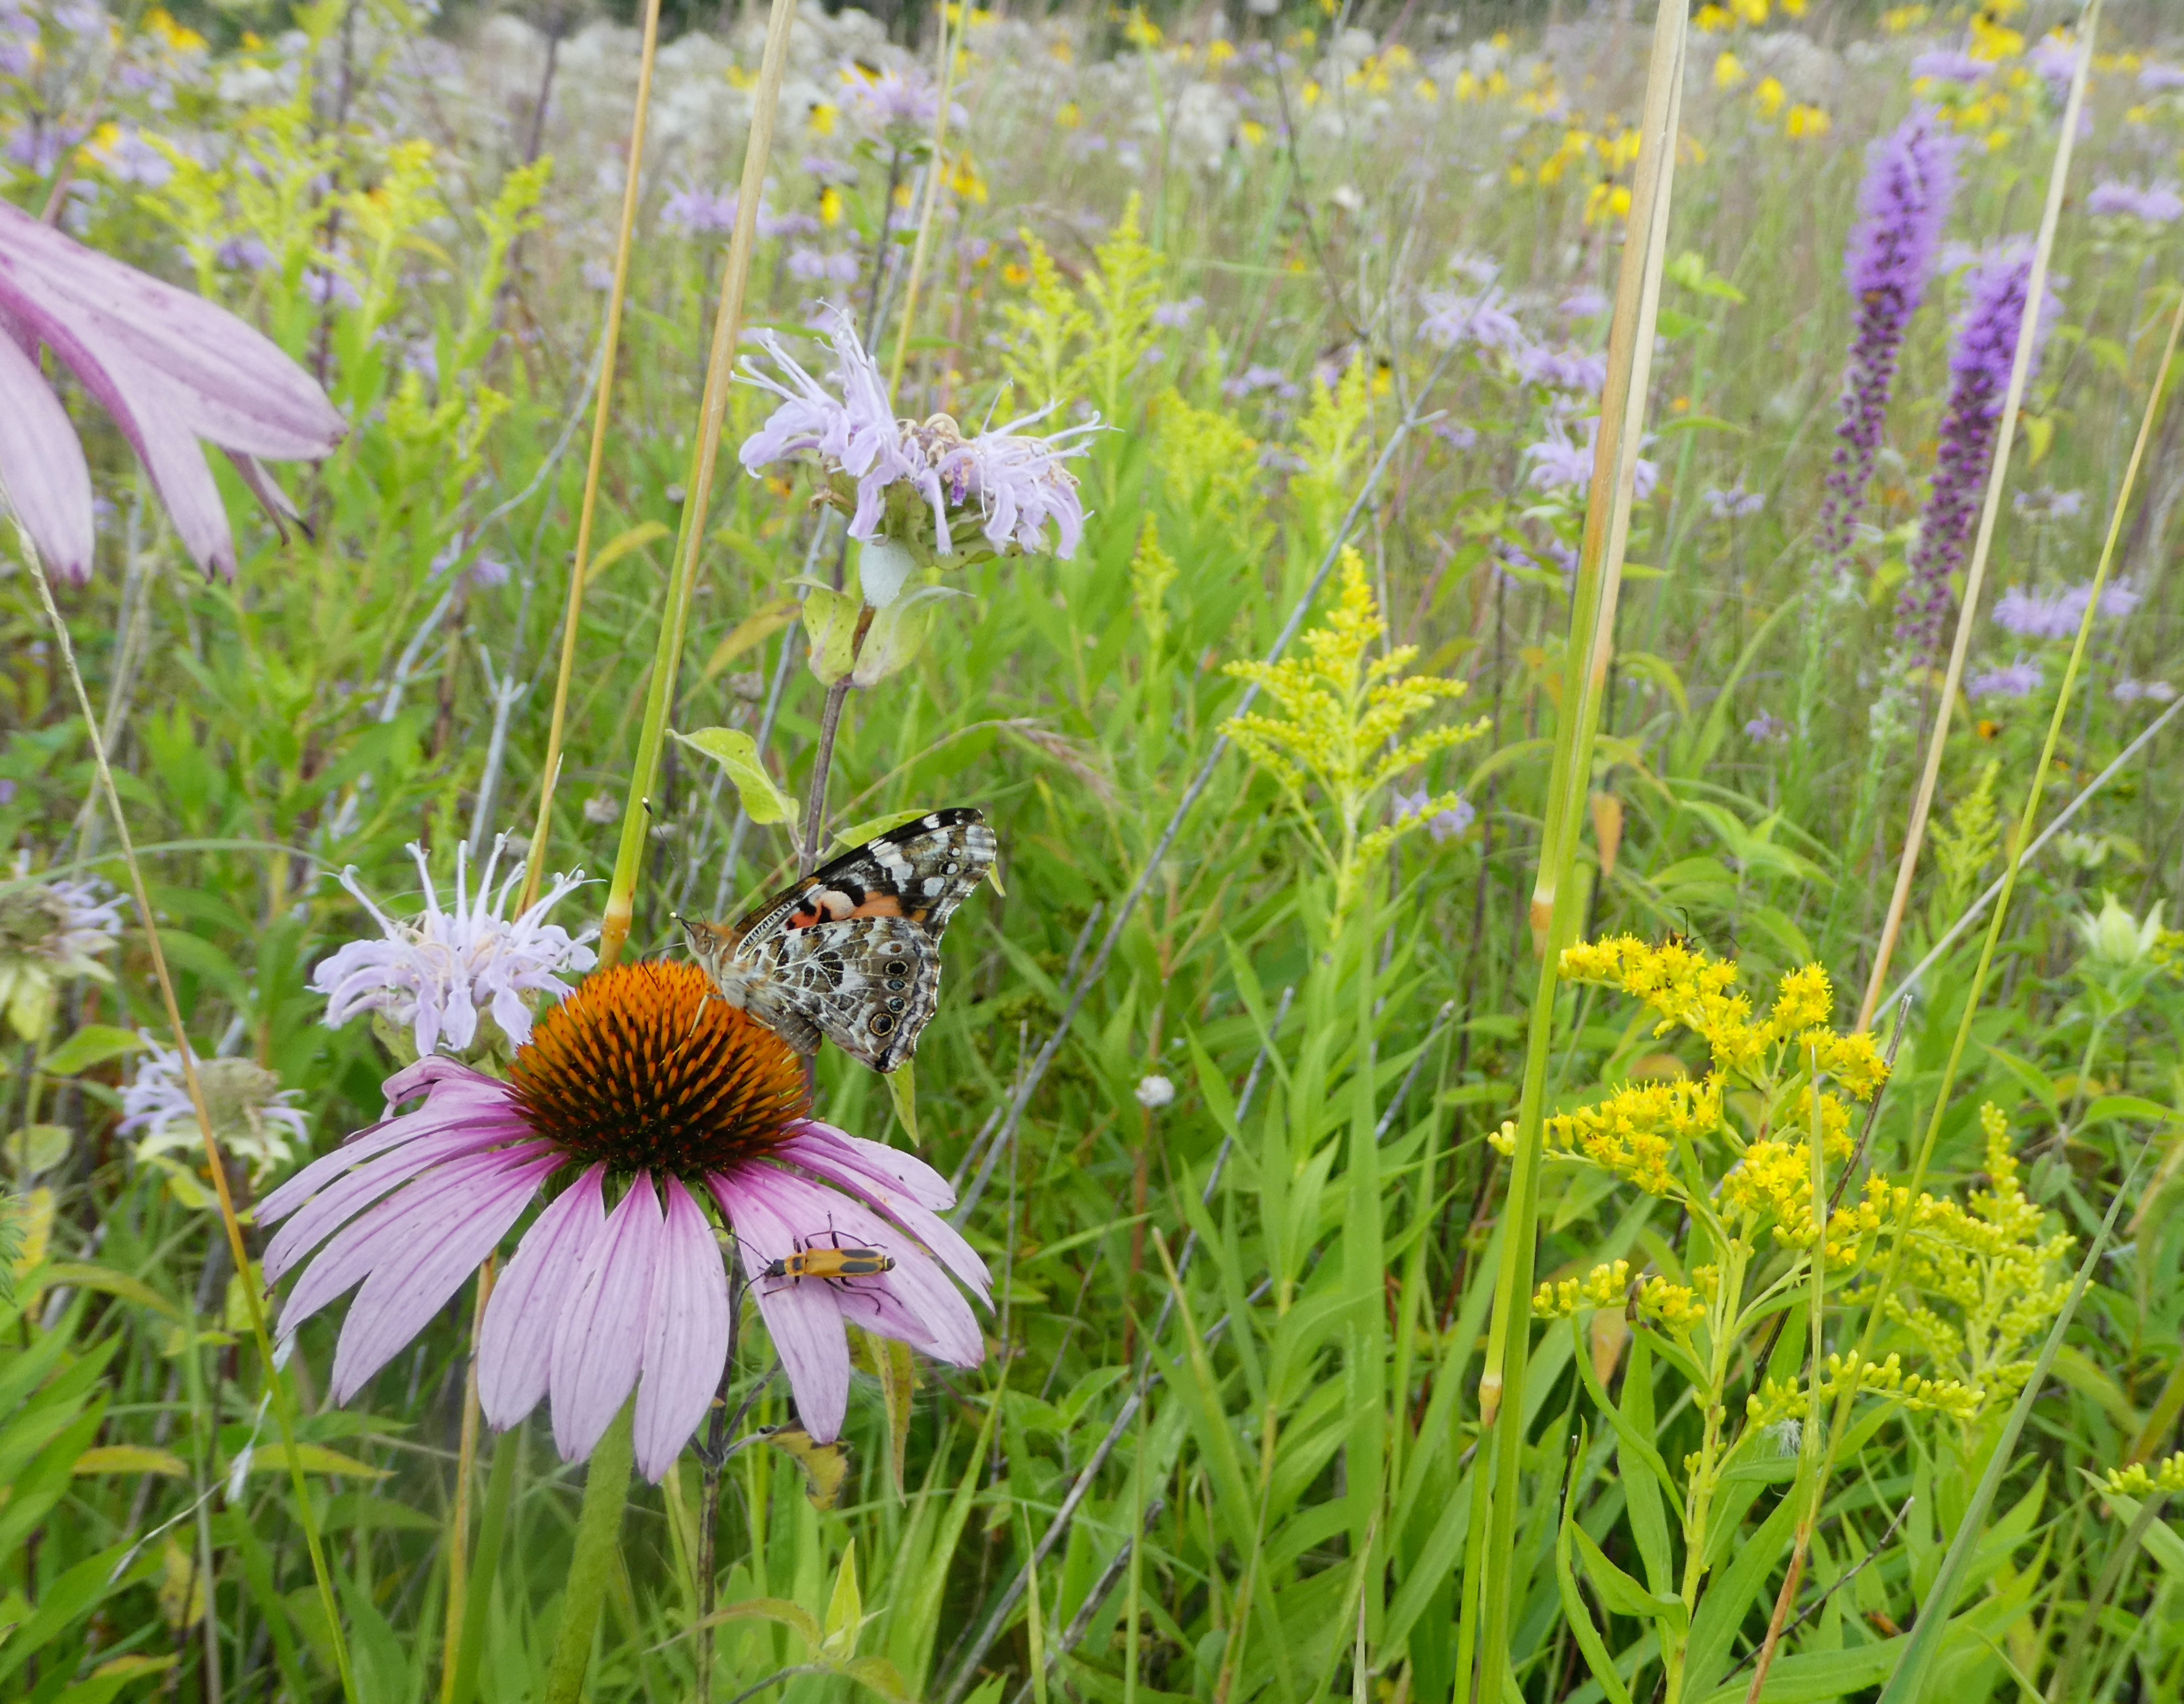 A dark-colored butterfly perches on a flower in a prairie.